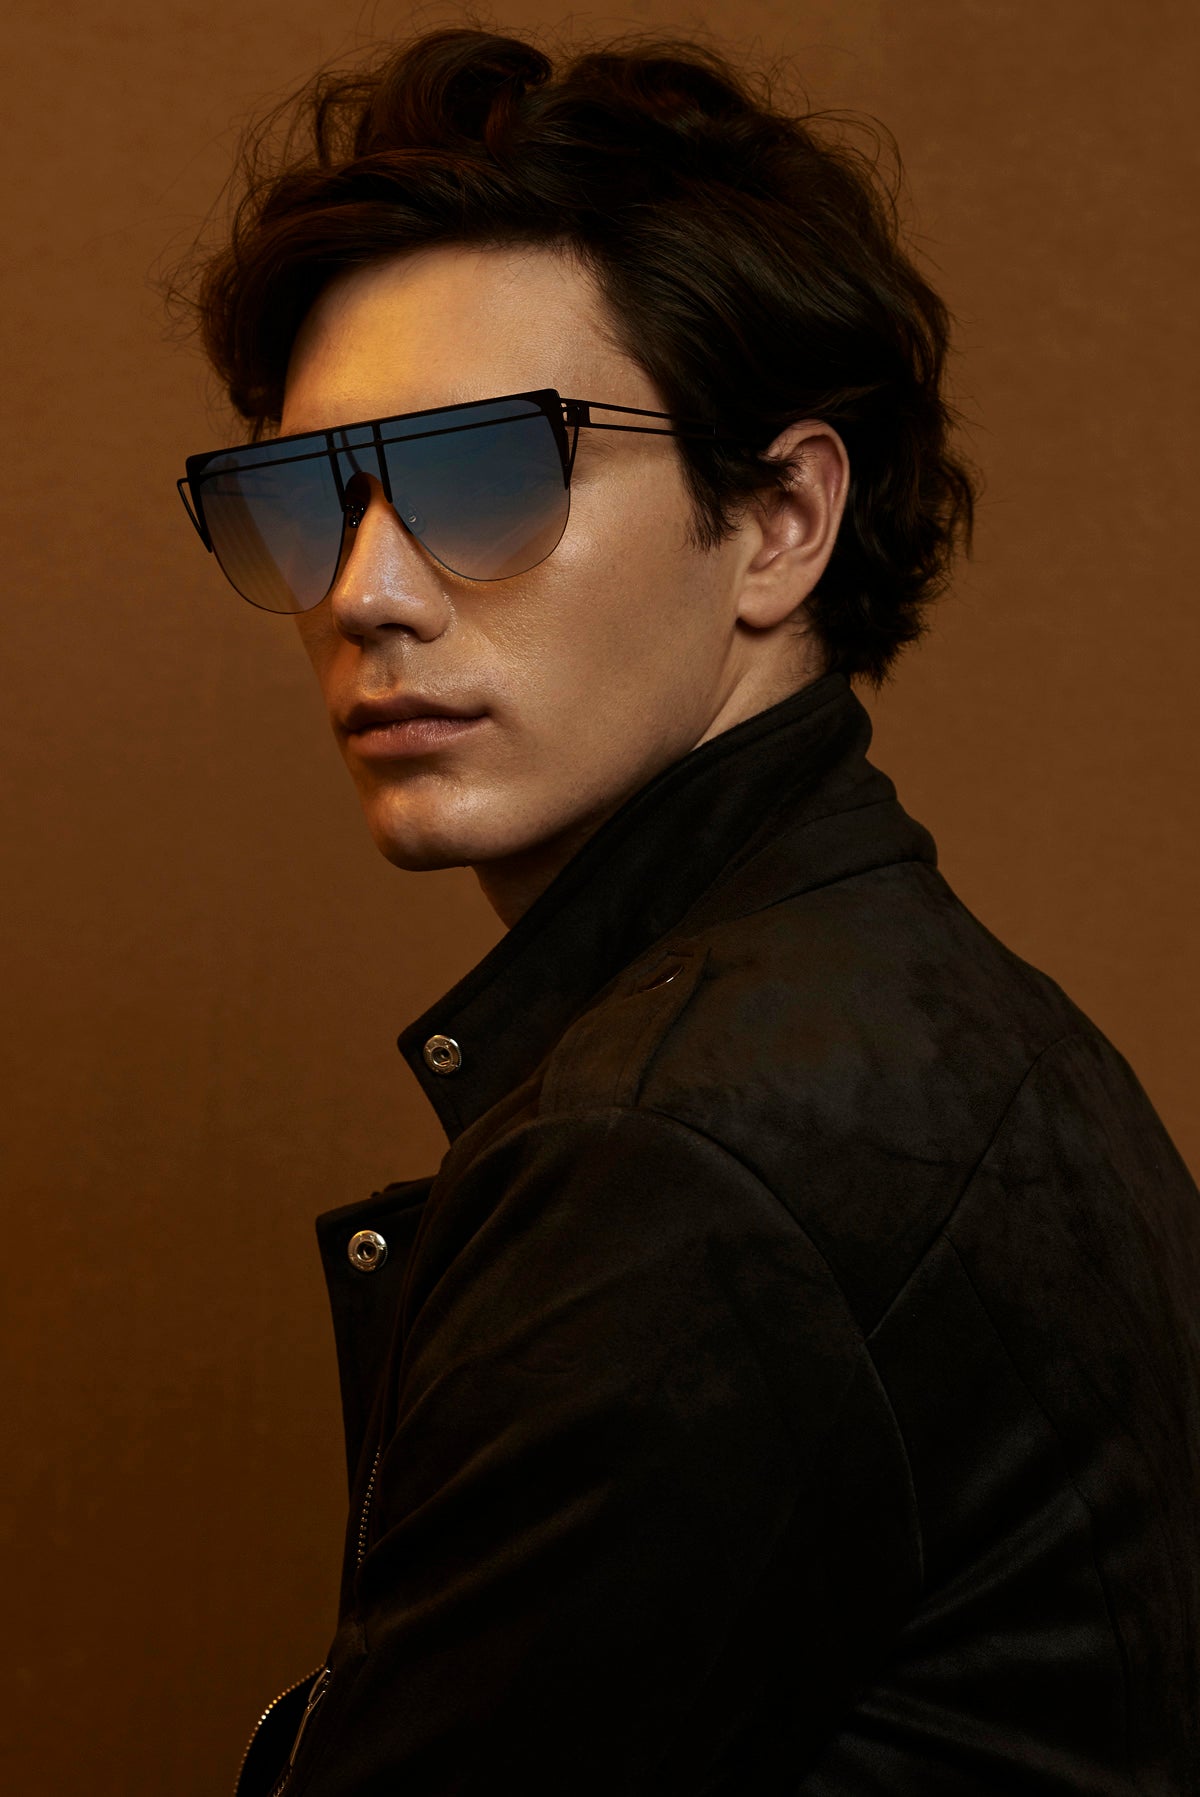 A young person with dark, wavy hair is wearing large, stylish For Art&#39;s Sake® Alien sunglasses with handmade gold-plated frames and a dark, fashionable jacket. They are posing against a plain brown background, looking slightly to the side with a calm expression.